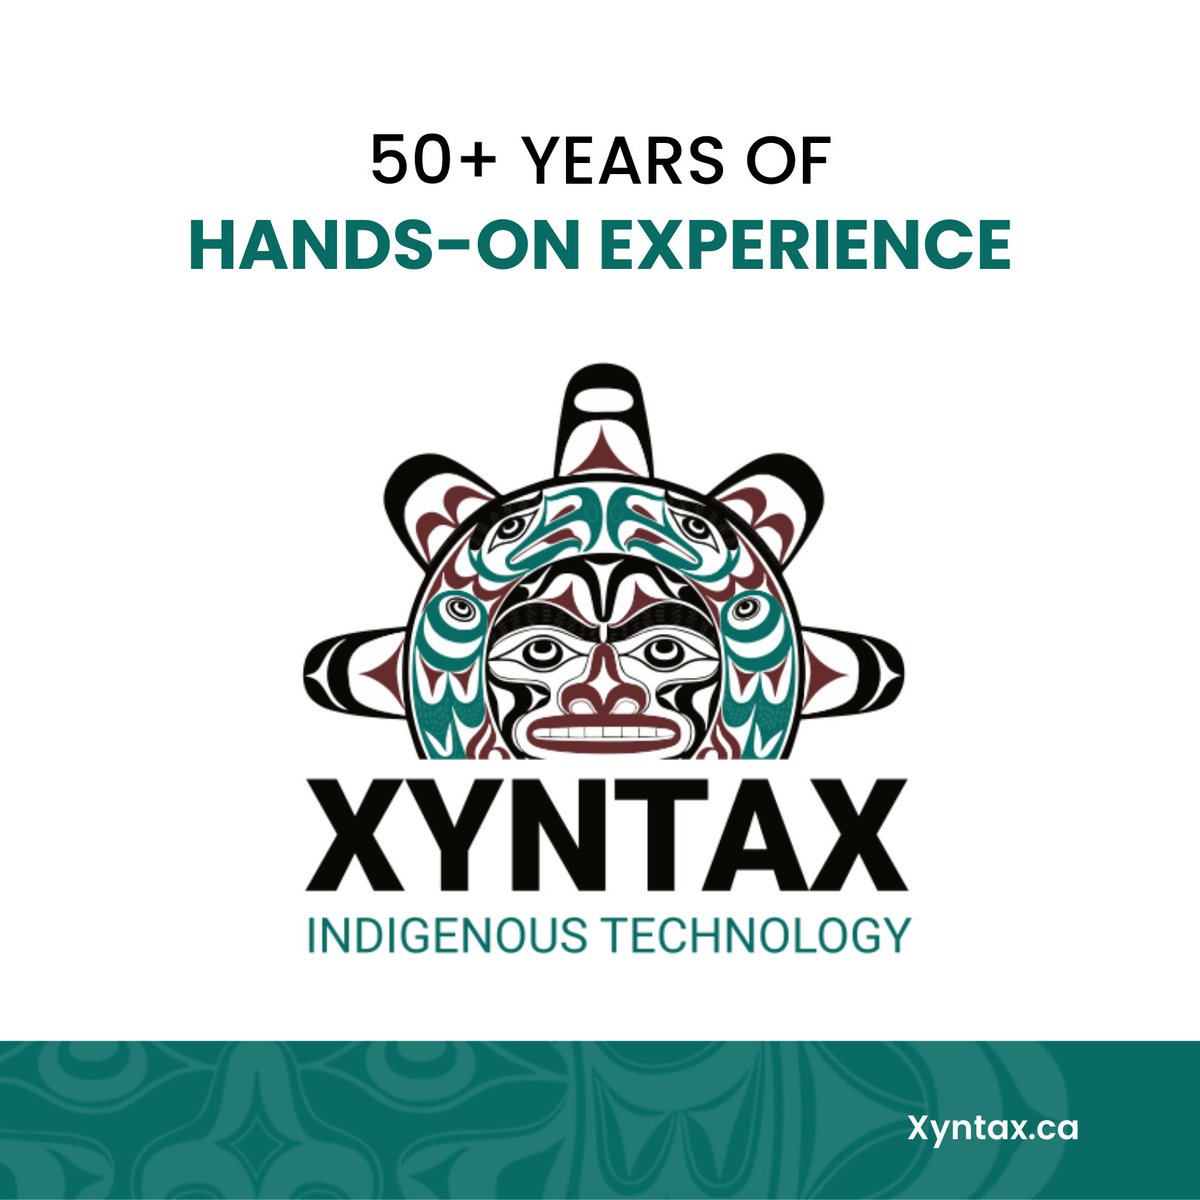 At Xyntax, our Finance & Management Services team brings unparalleled knowledge and insight to the table. Our commitment is to empower your business with financial strategies that stand the test of time.

#FinancialExperts #BusinessFinance #Xyntax